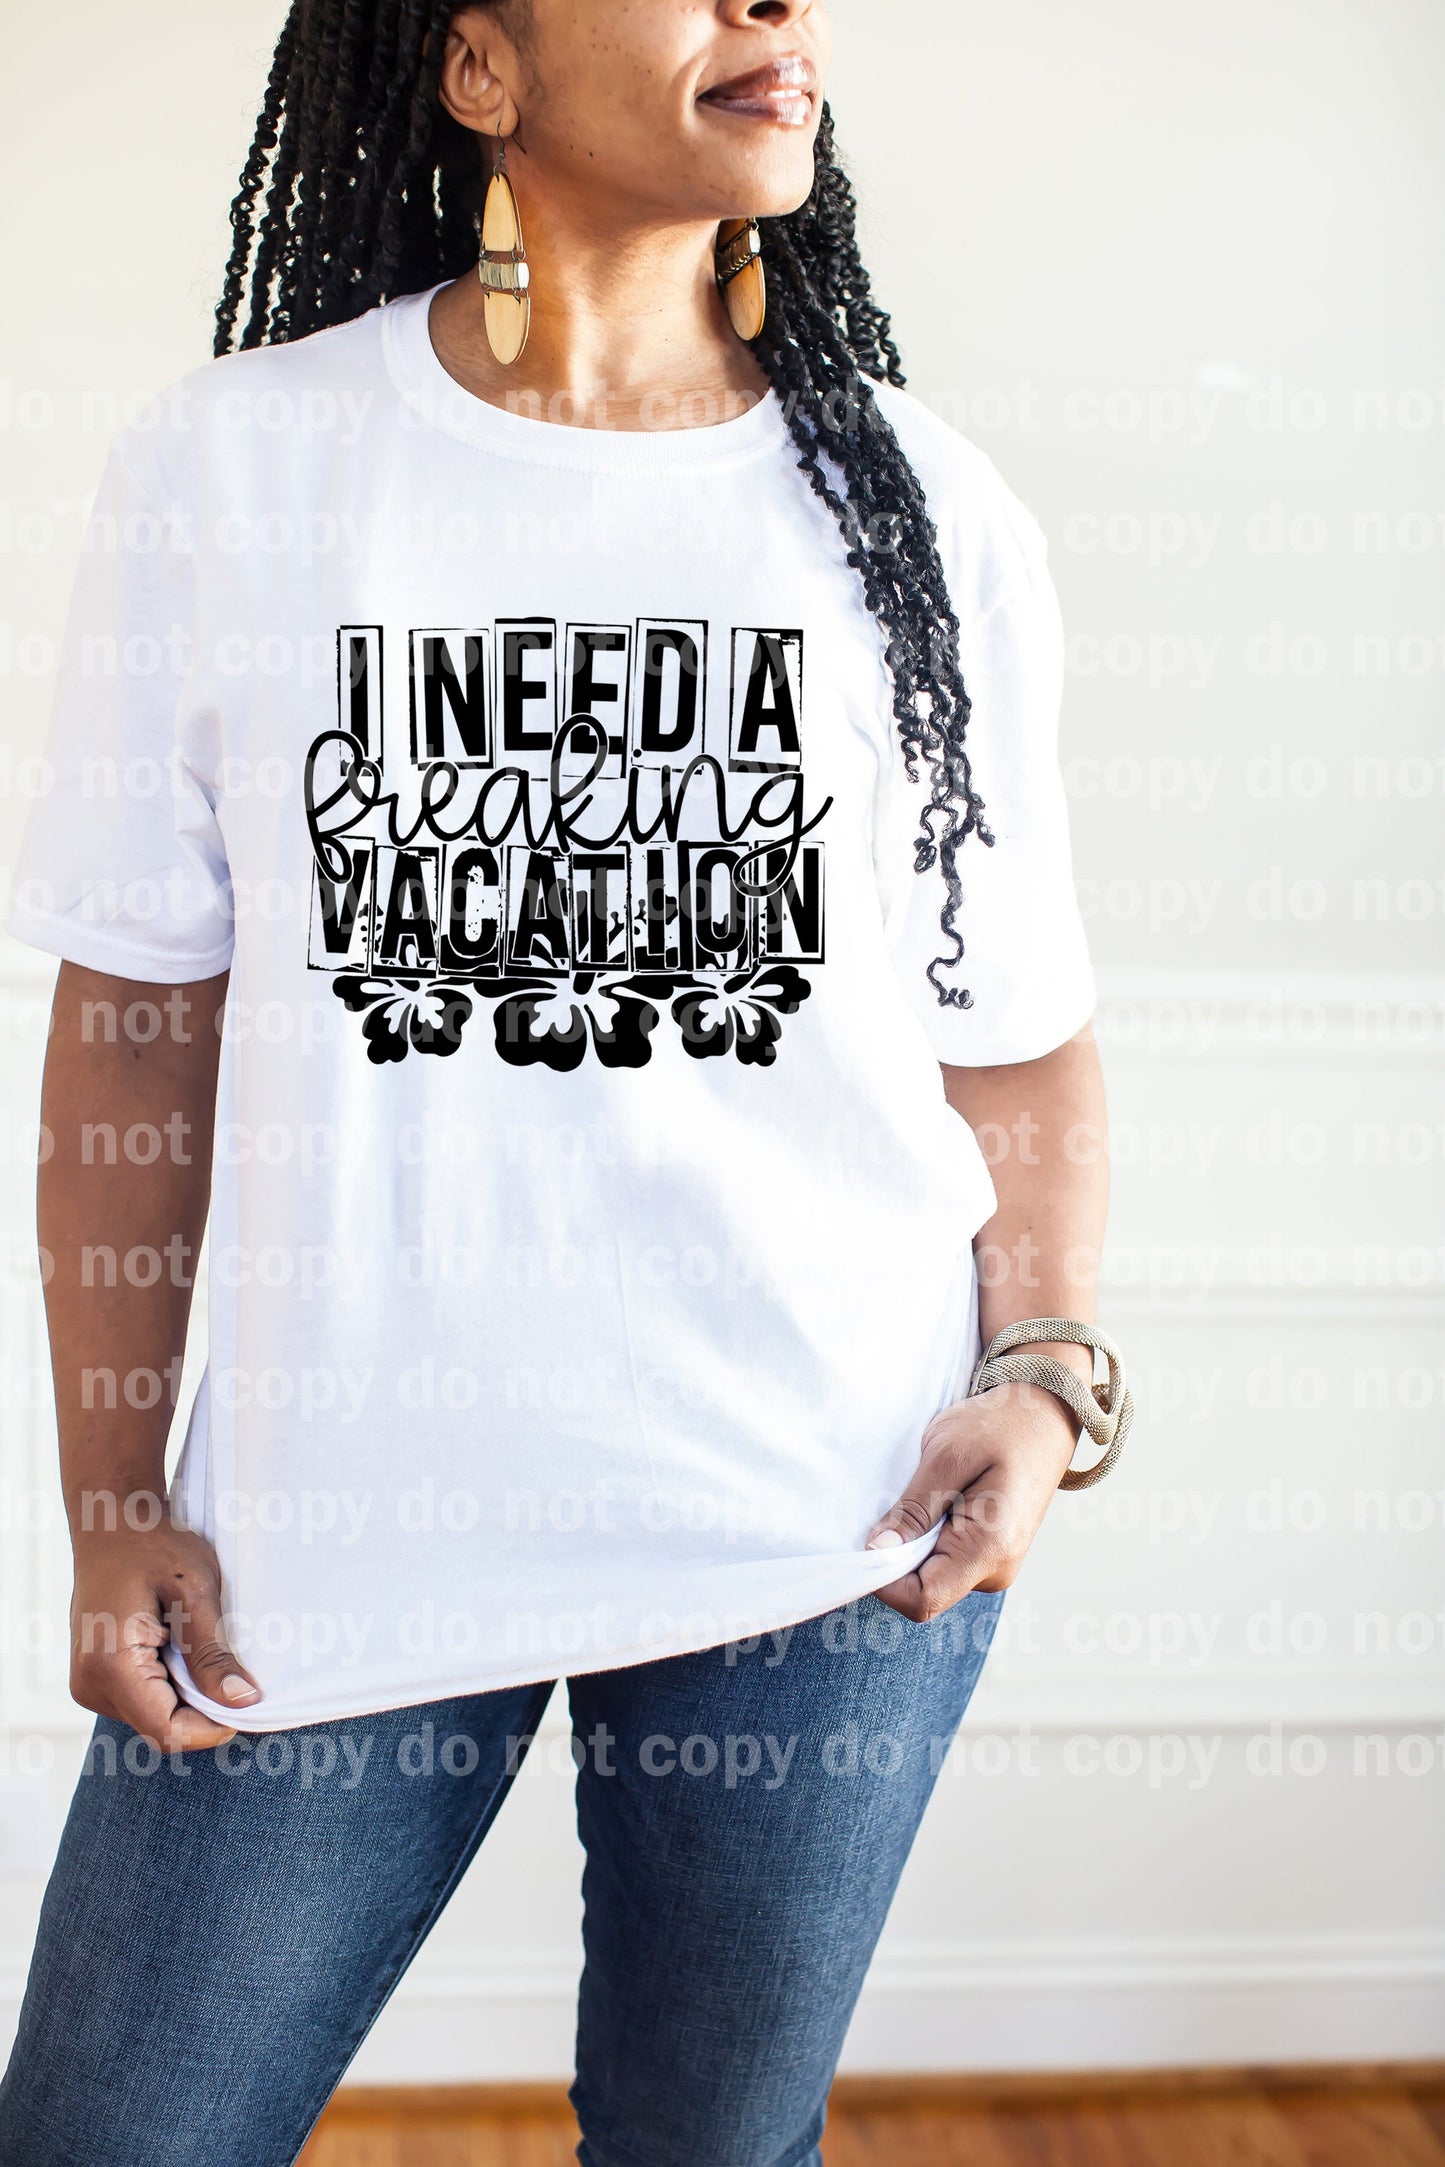 I Need A Freaking Vacation Full Color/One Color Dream Print or Sublimation Print